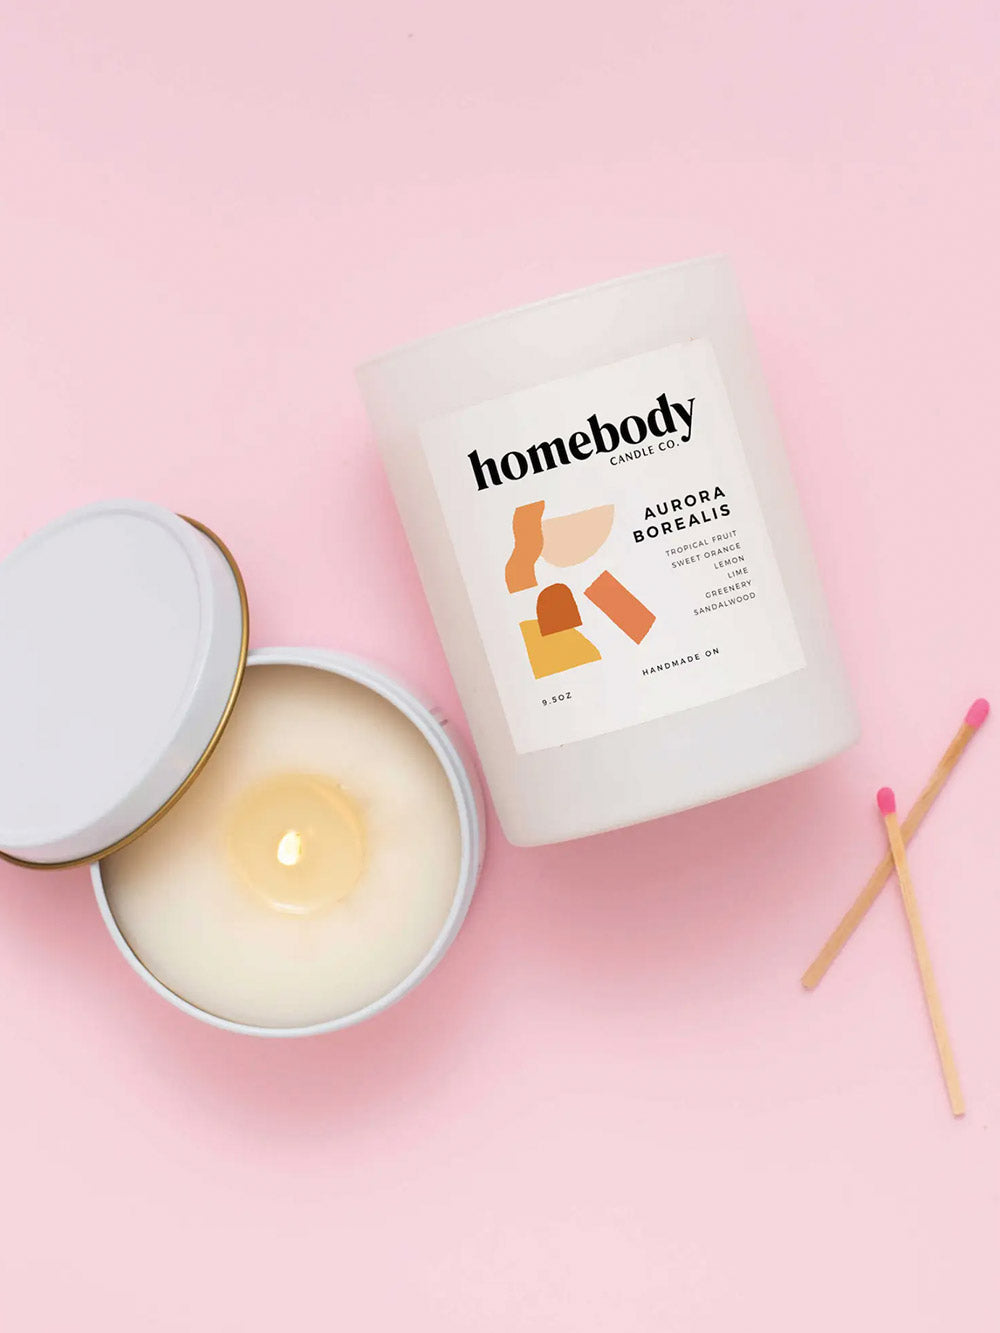 Homebody Candle Co | Burn and Bloom Candle | Aurora Borealis | Wildflower Infused